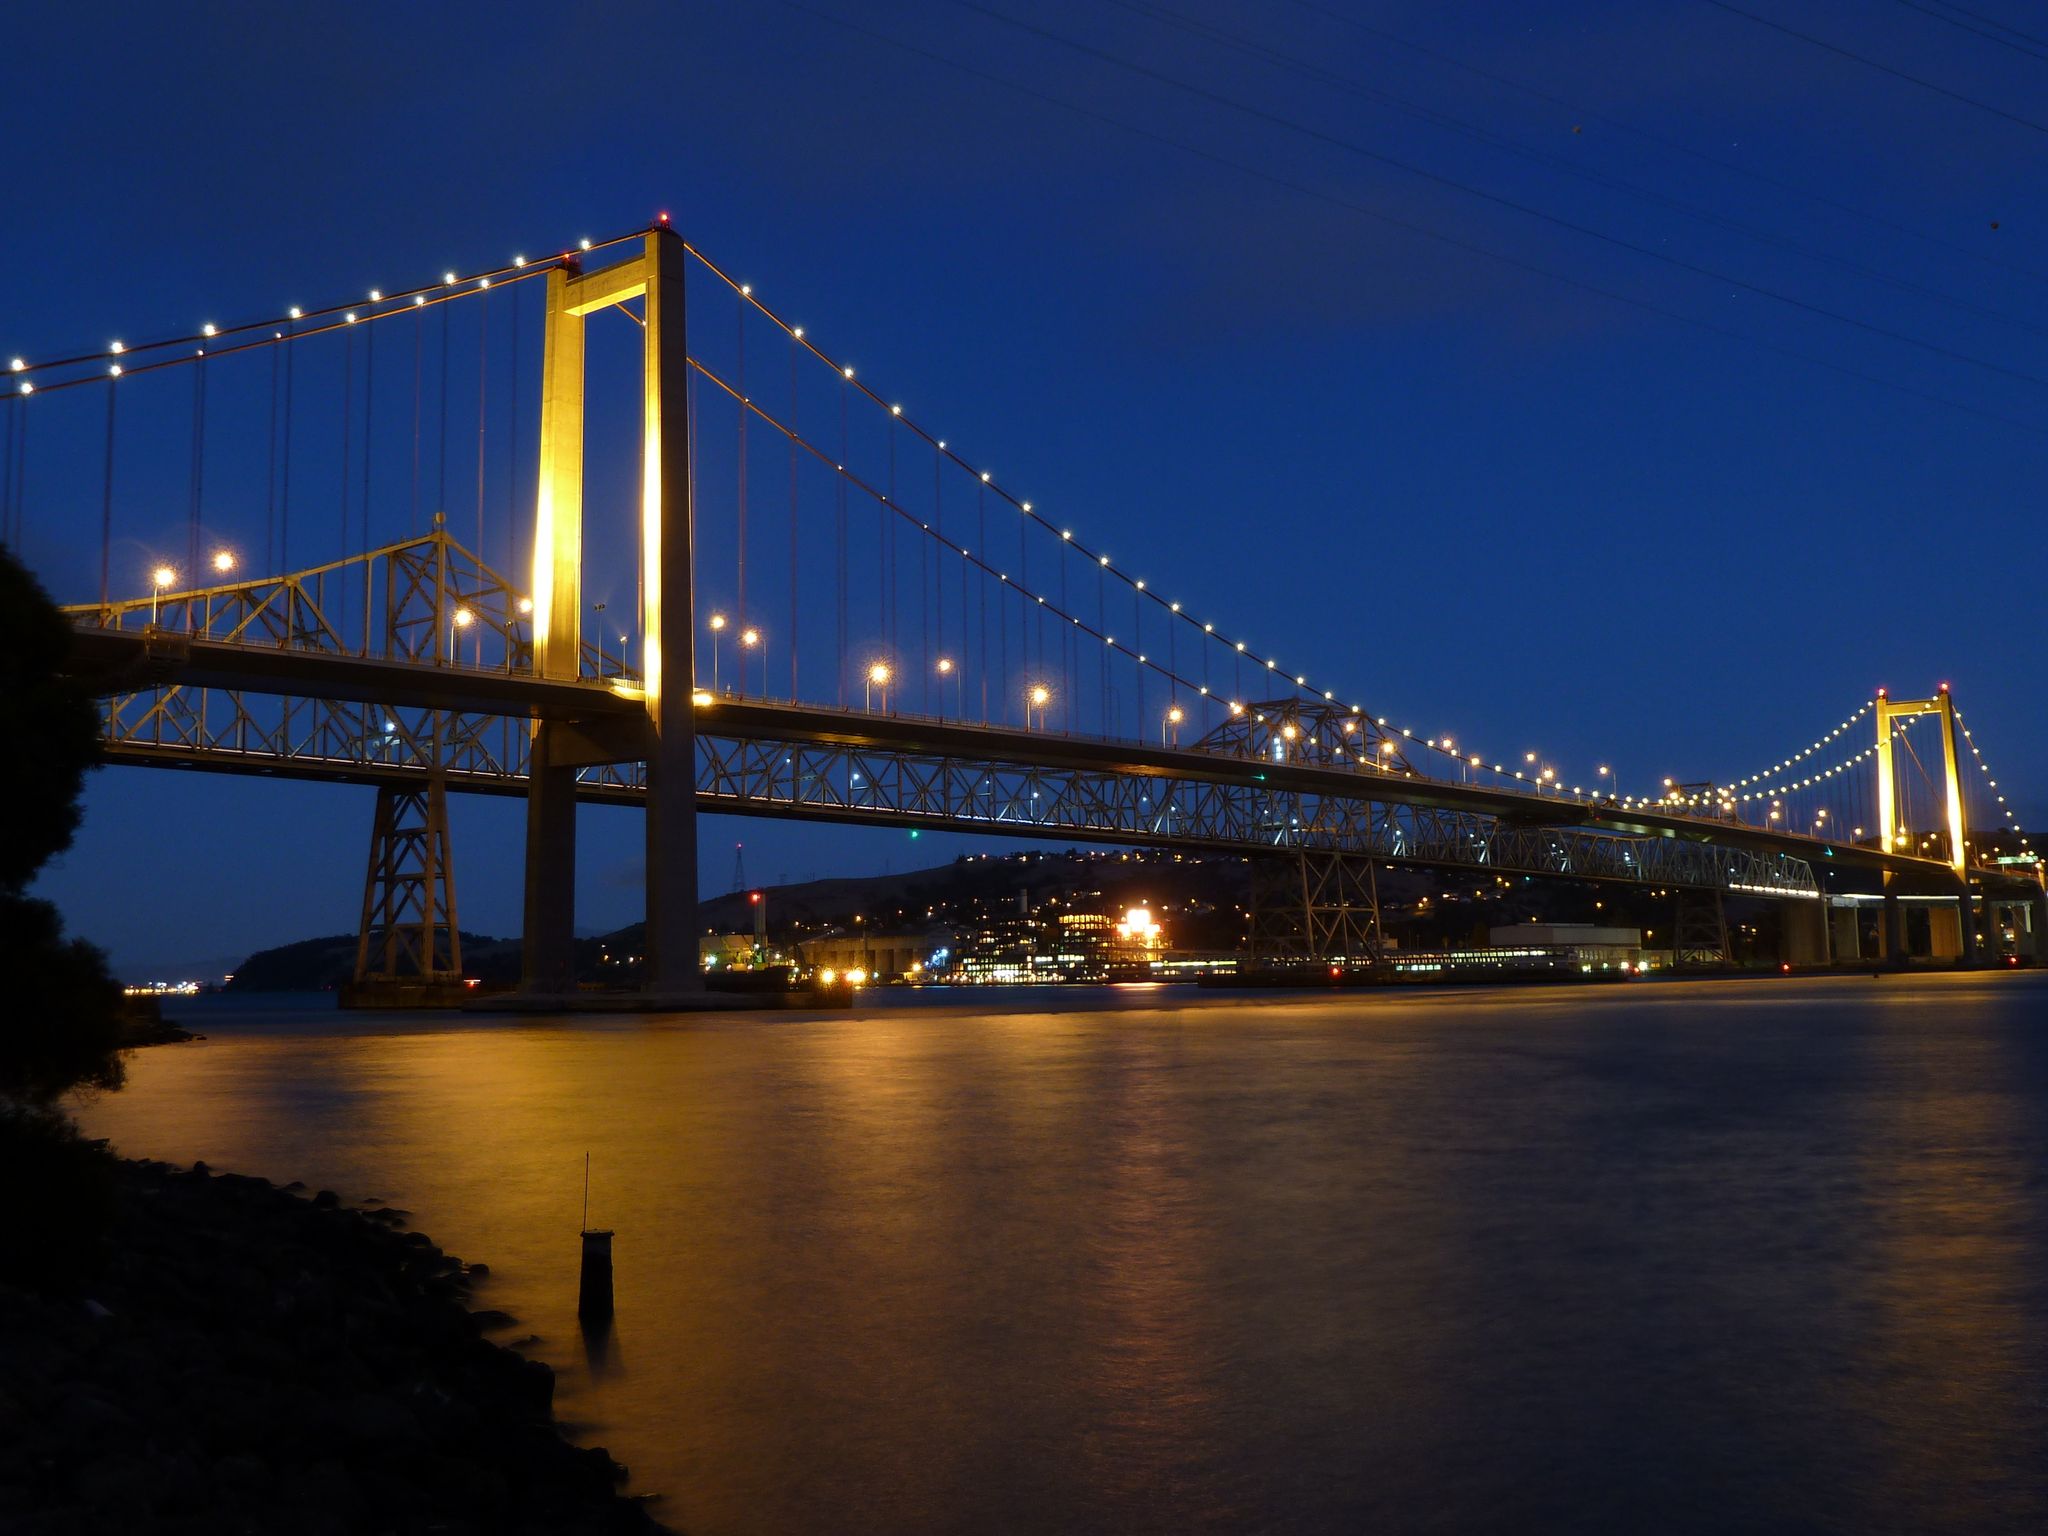 This is a shot of the Carquinez Bridge taken from the ramp to the dock on Cal Maritime's campus.